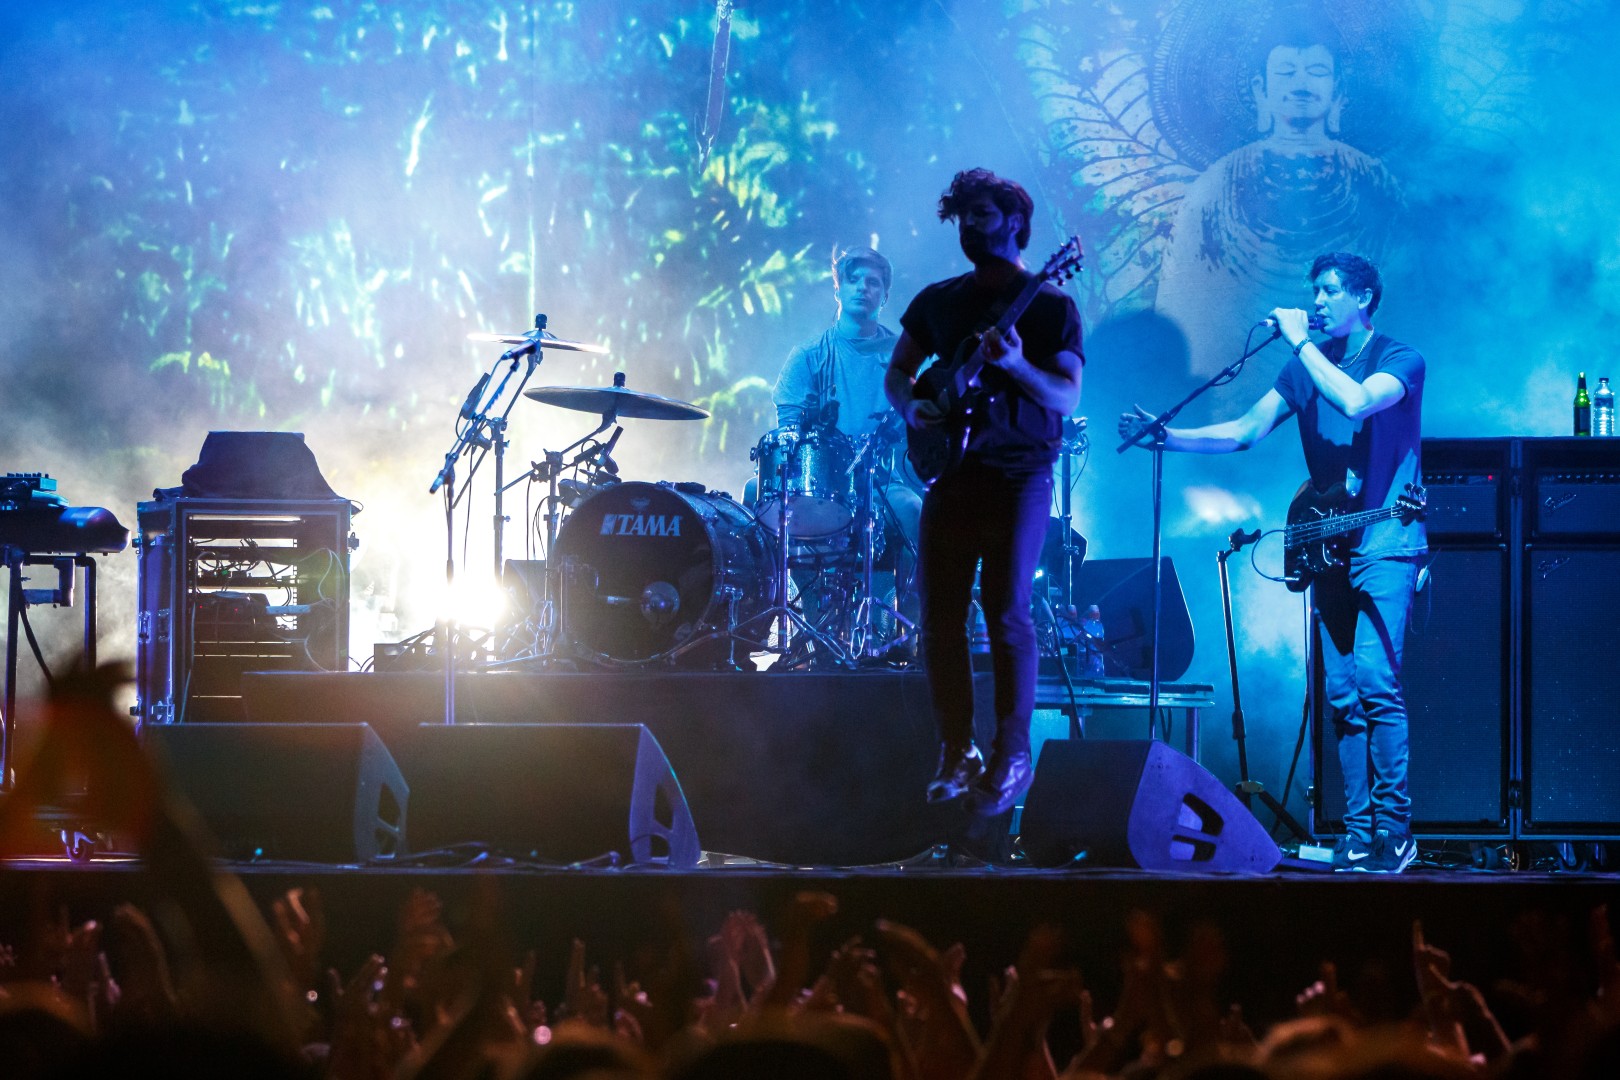 Foals at Domeniul Stirbey in Buftea on August 8, 2015 (949af89d36)